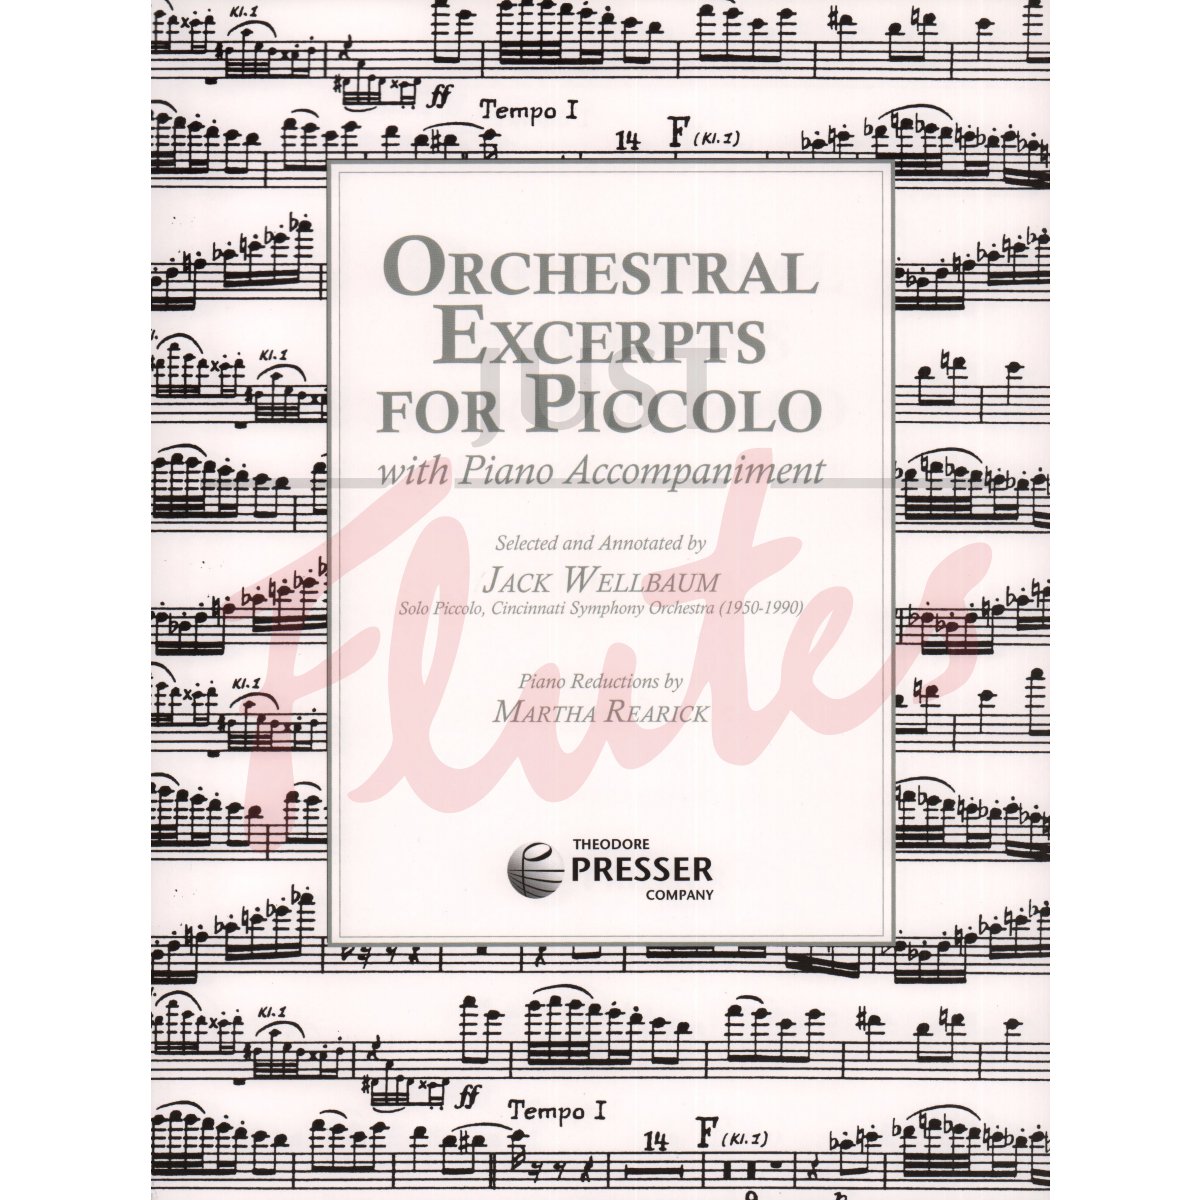 Orchestral Excerpts for Piccolo with Piano Accompaniment